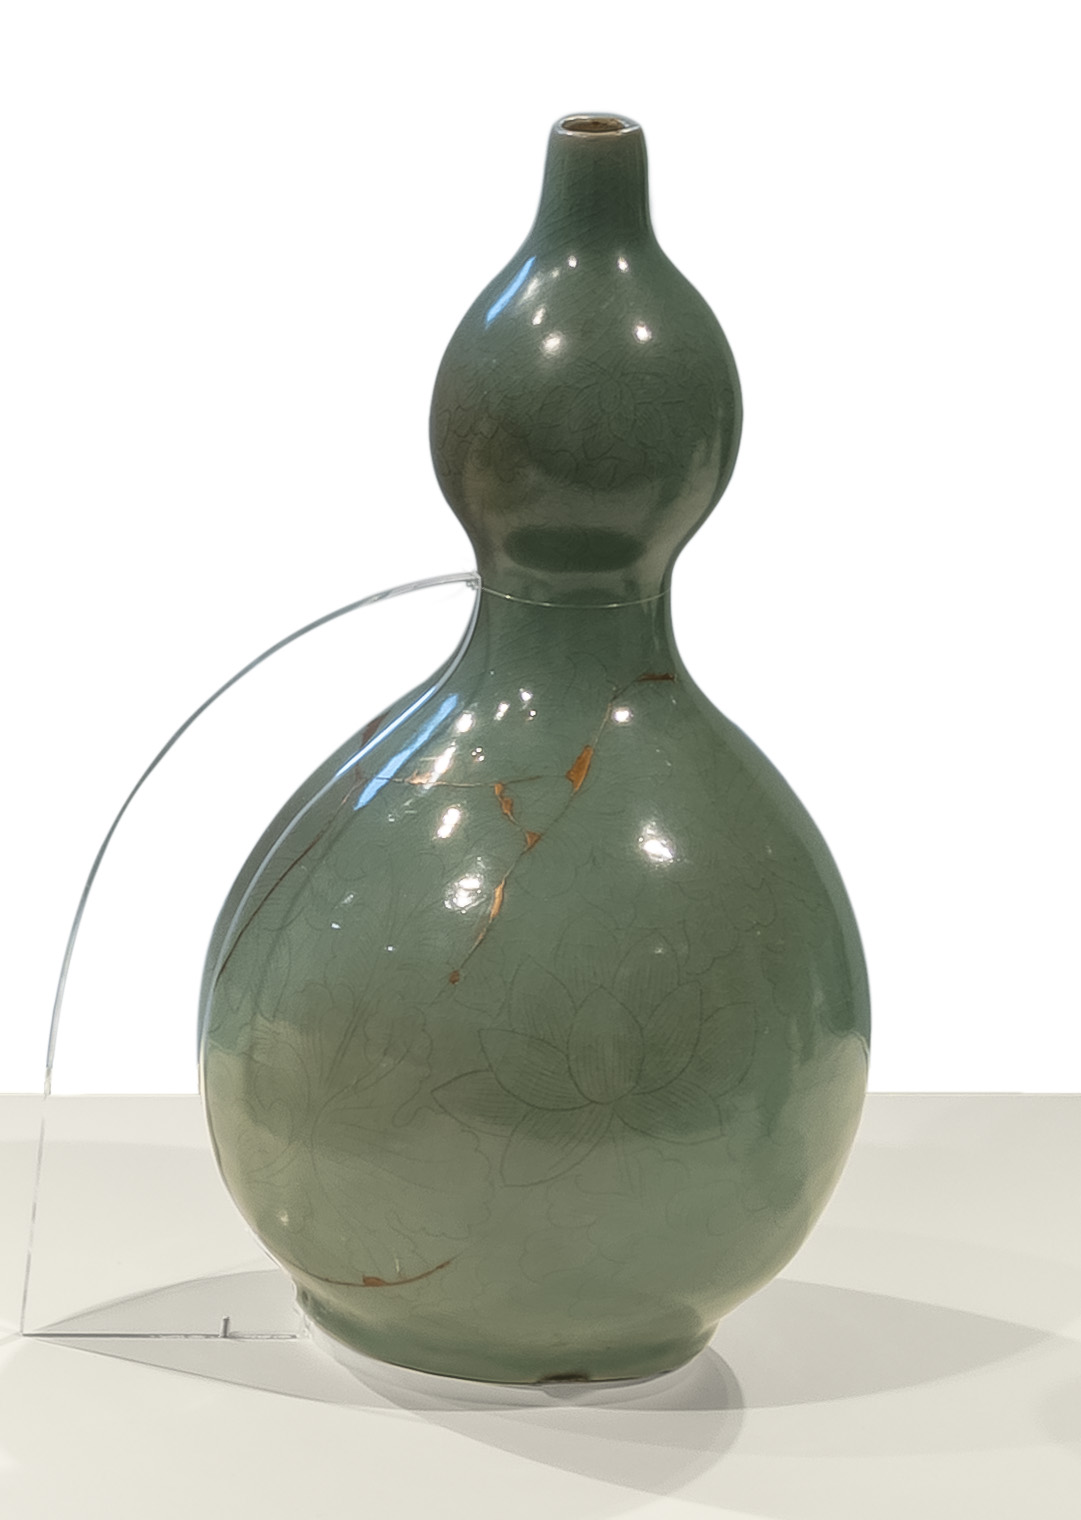 A celadon gourd-shaped bottle mended with golden cracks. Delicate floral motifs of lotus are incised on its surface